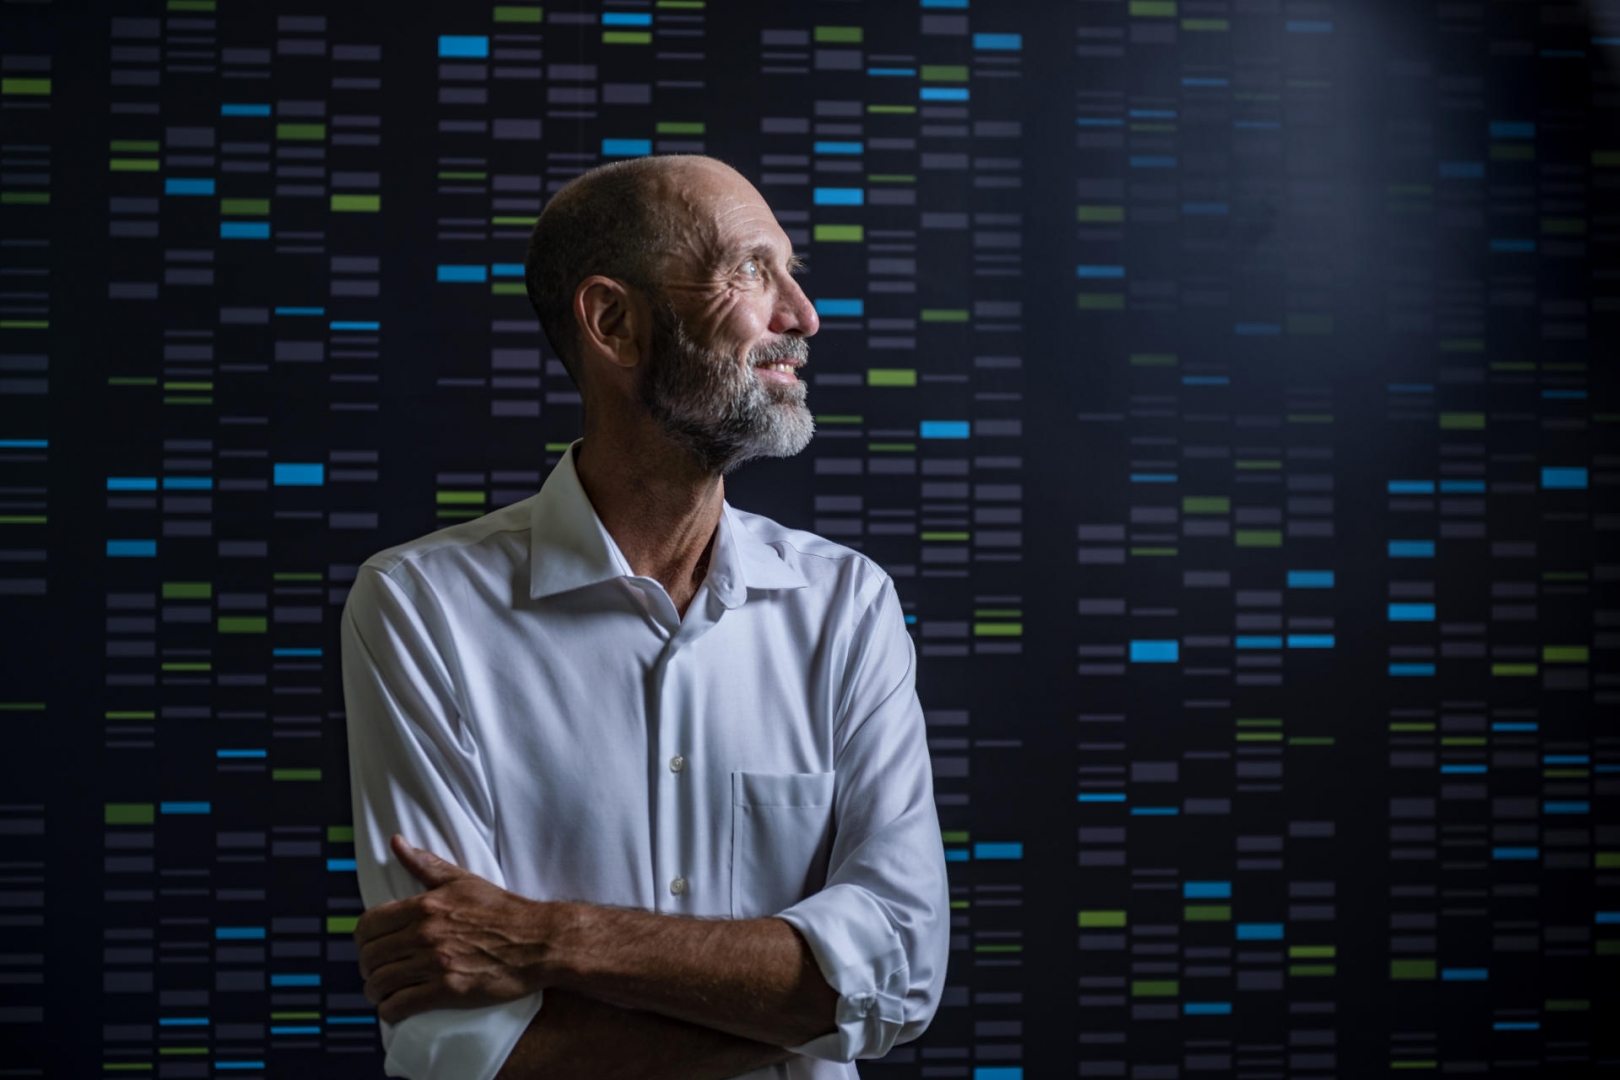 Portrait of Mark Velligan against a wall that shows the coding lines of DNA sequencing.